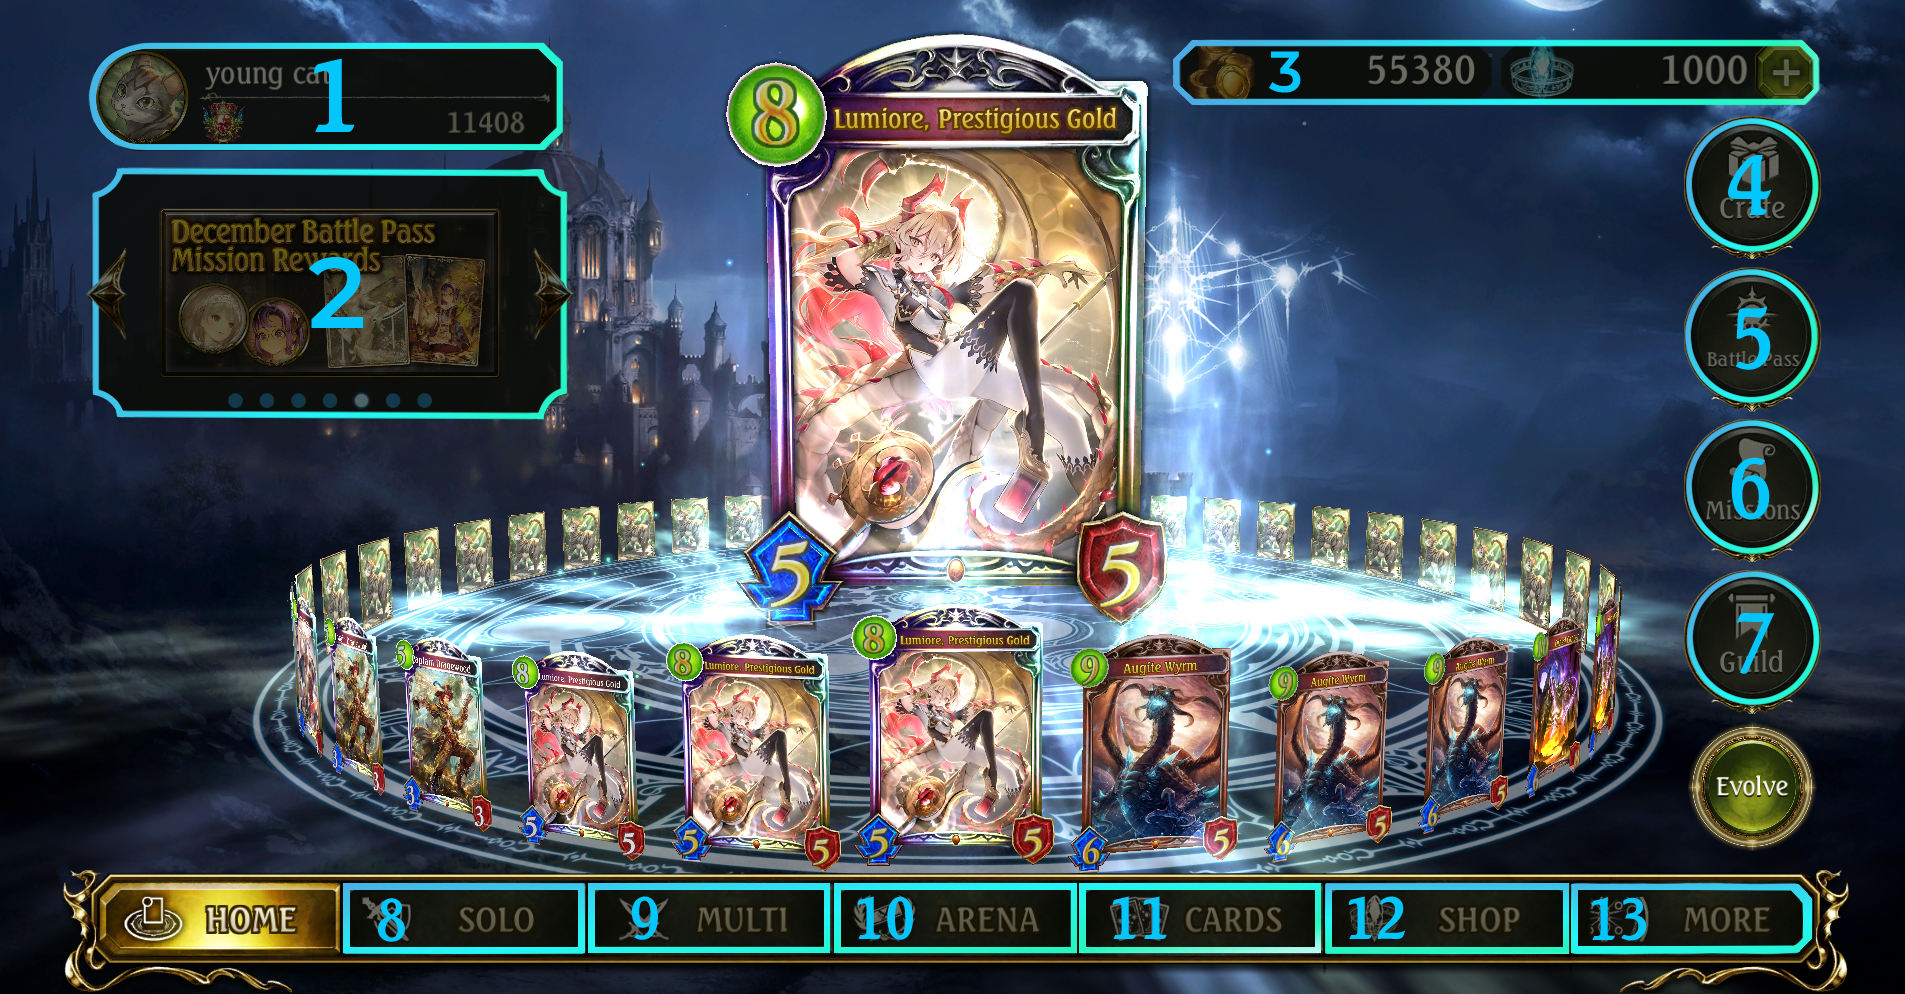 Shadowverse on X: Shadowverse Flame tie-in event! Play the event quests to  get special rewards, including animated alternate-art cards!   / X